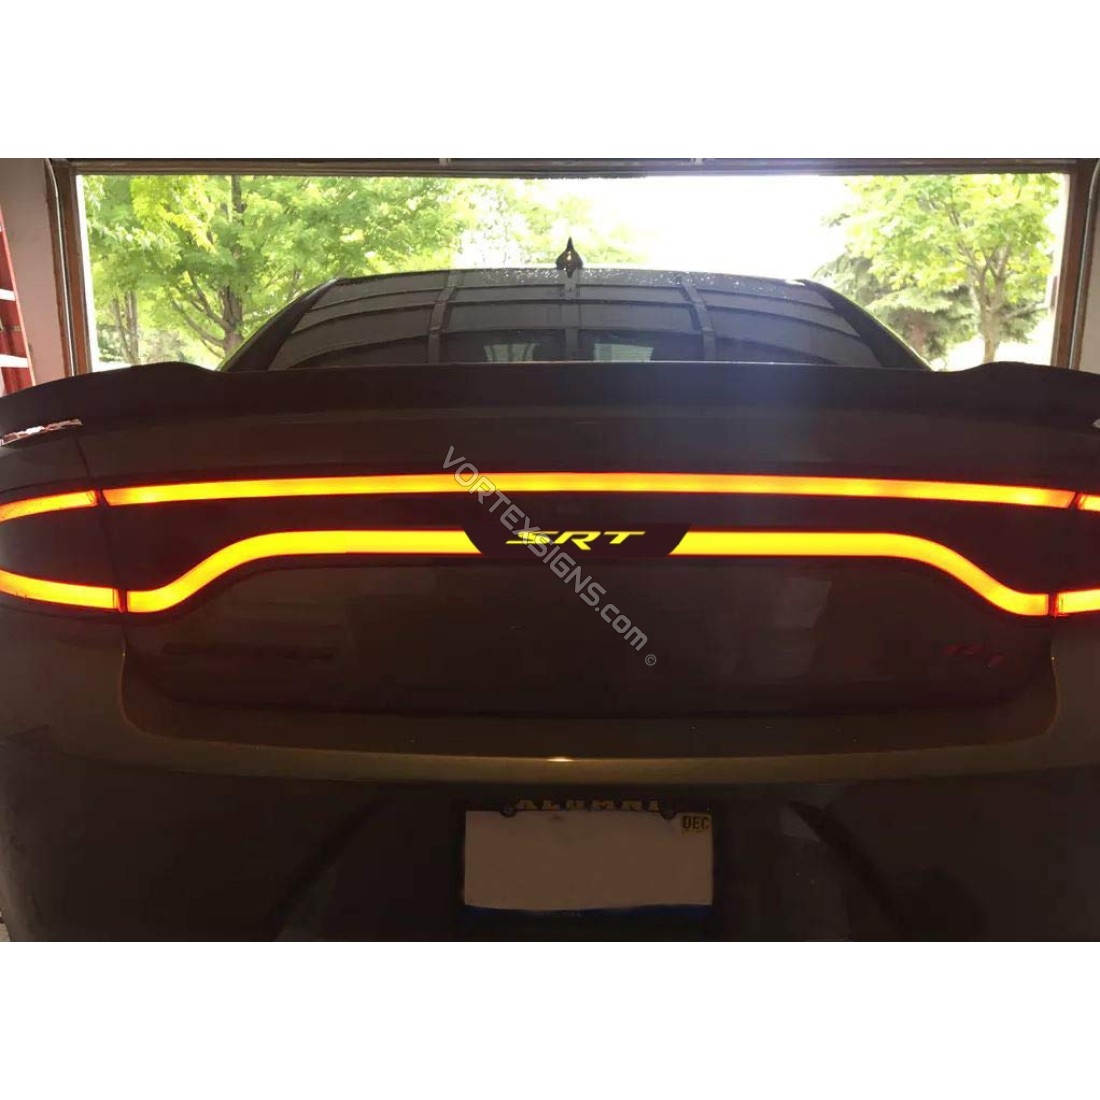 SALE! Dodge Charger tail lamp light Custom text decal 10 OFF